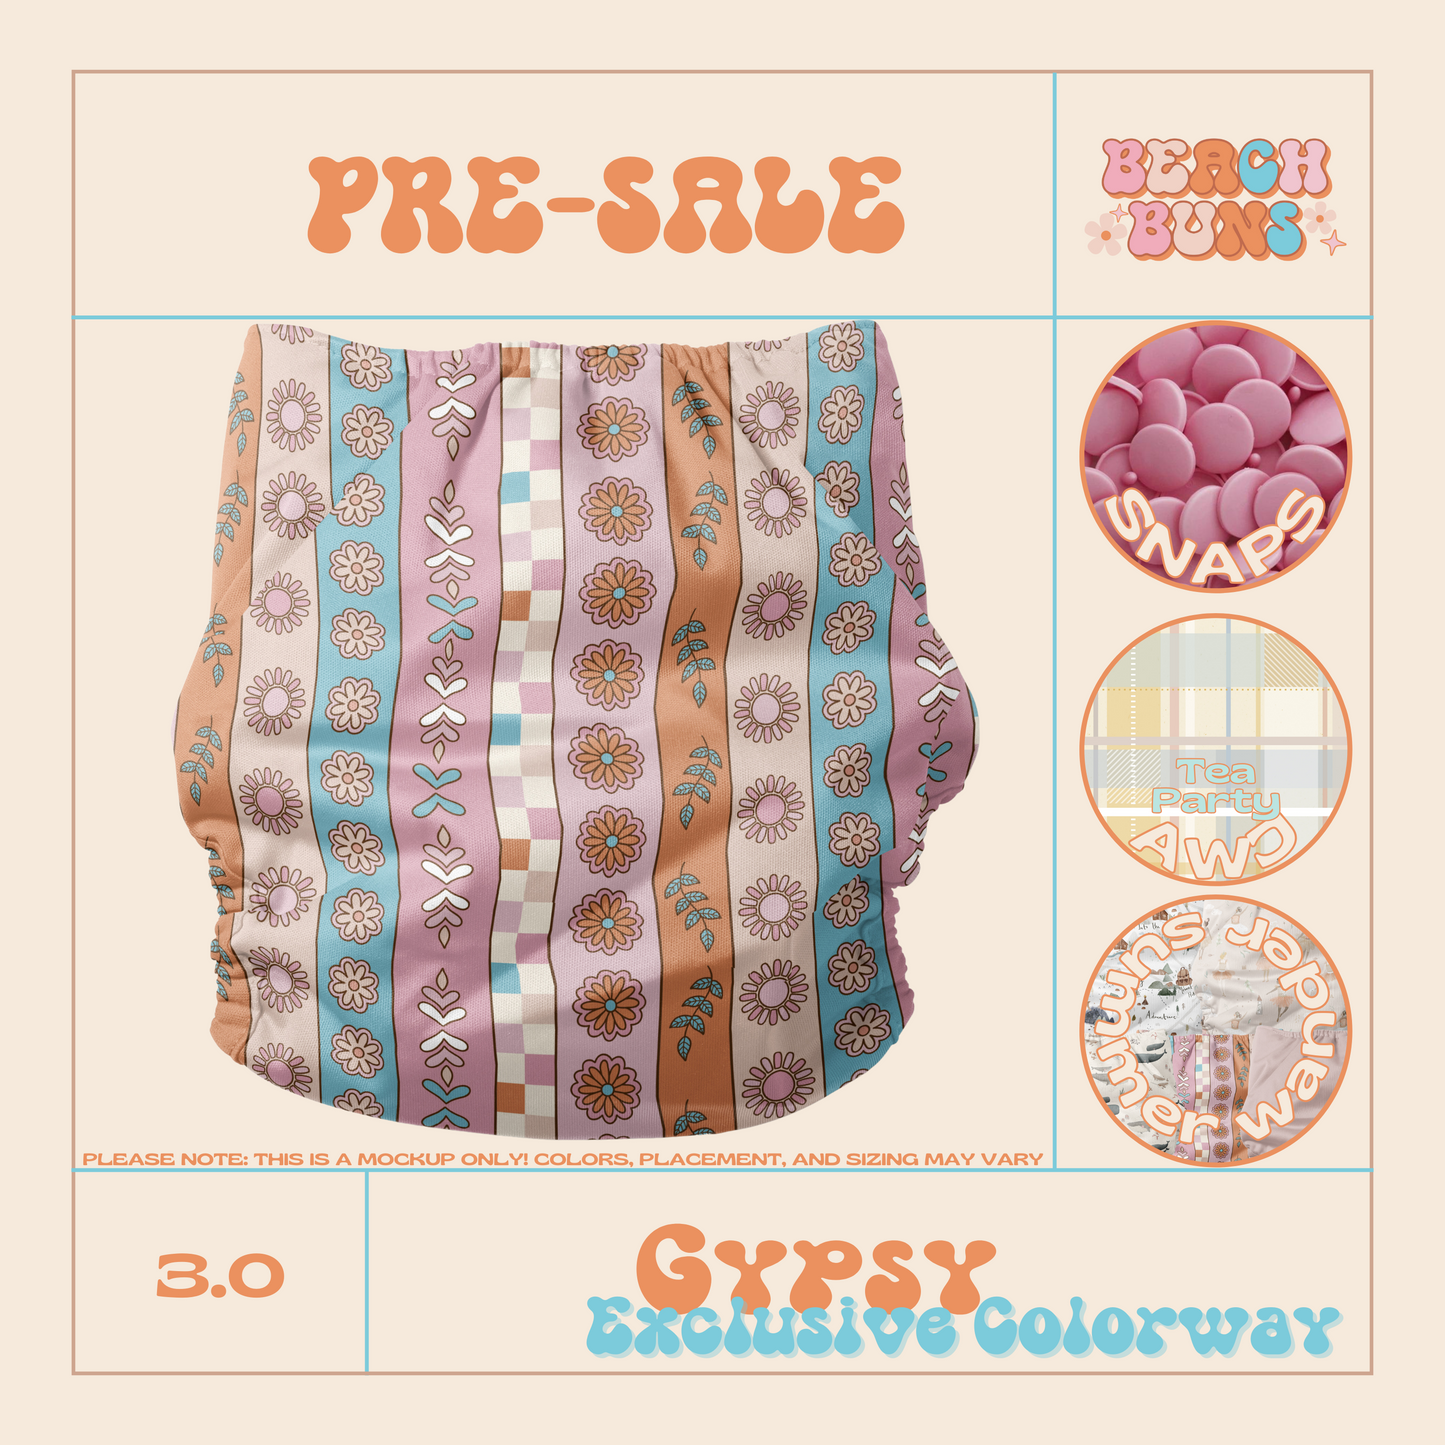 Gypsy |Pocket Cloth Diaper | Athletic Wicking Jersey 3.0